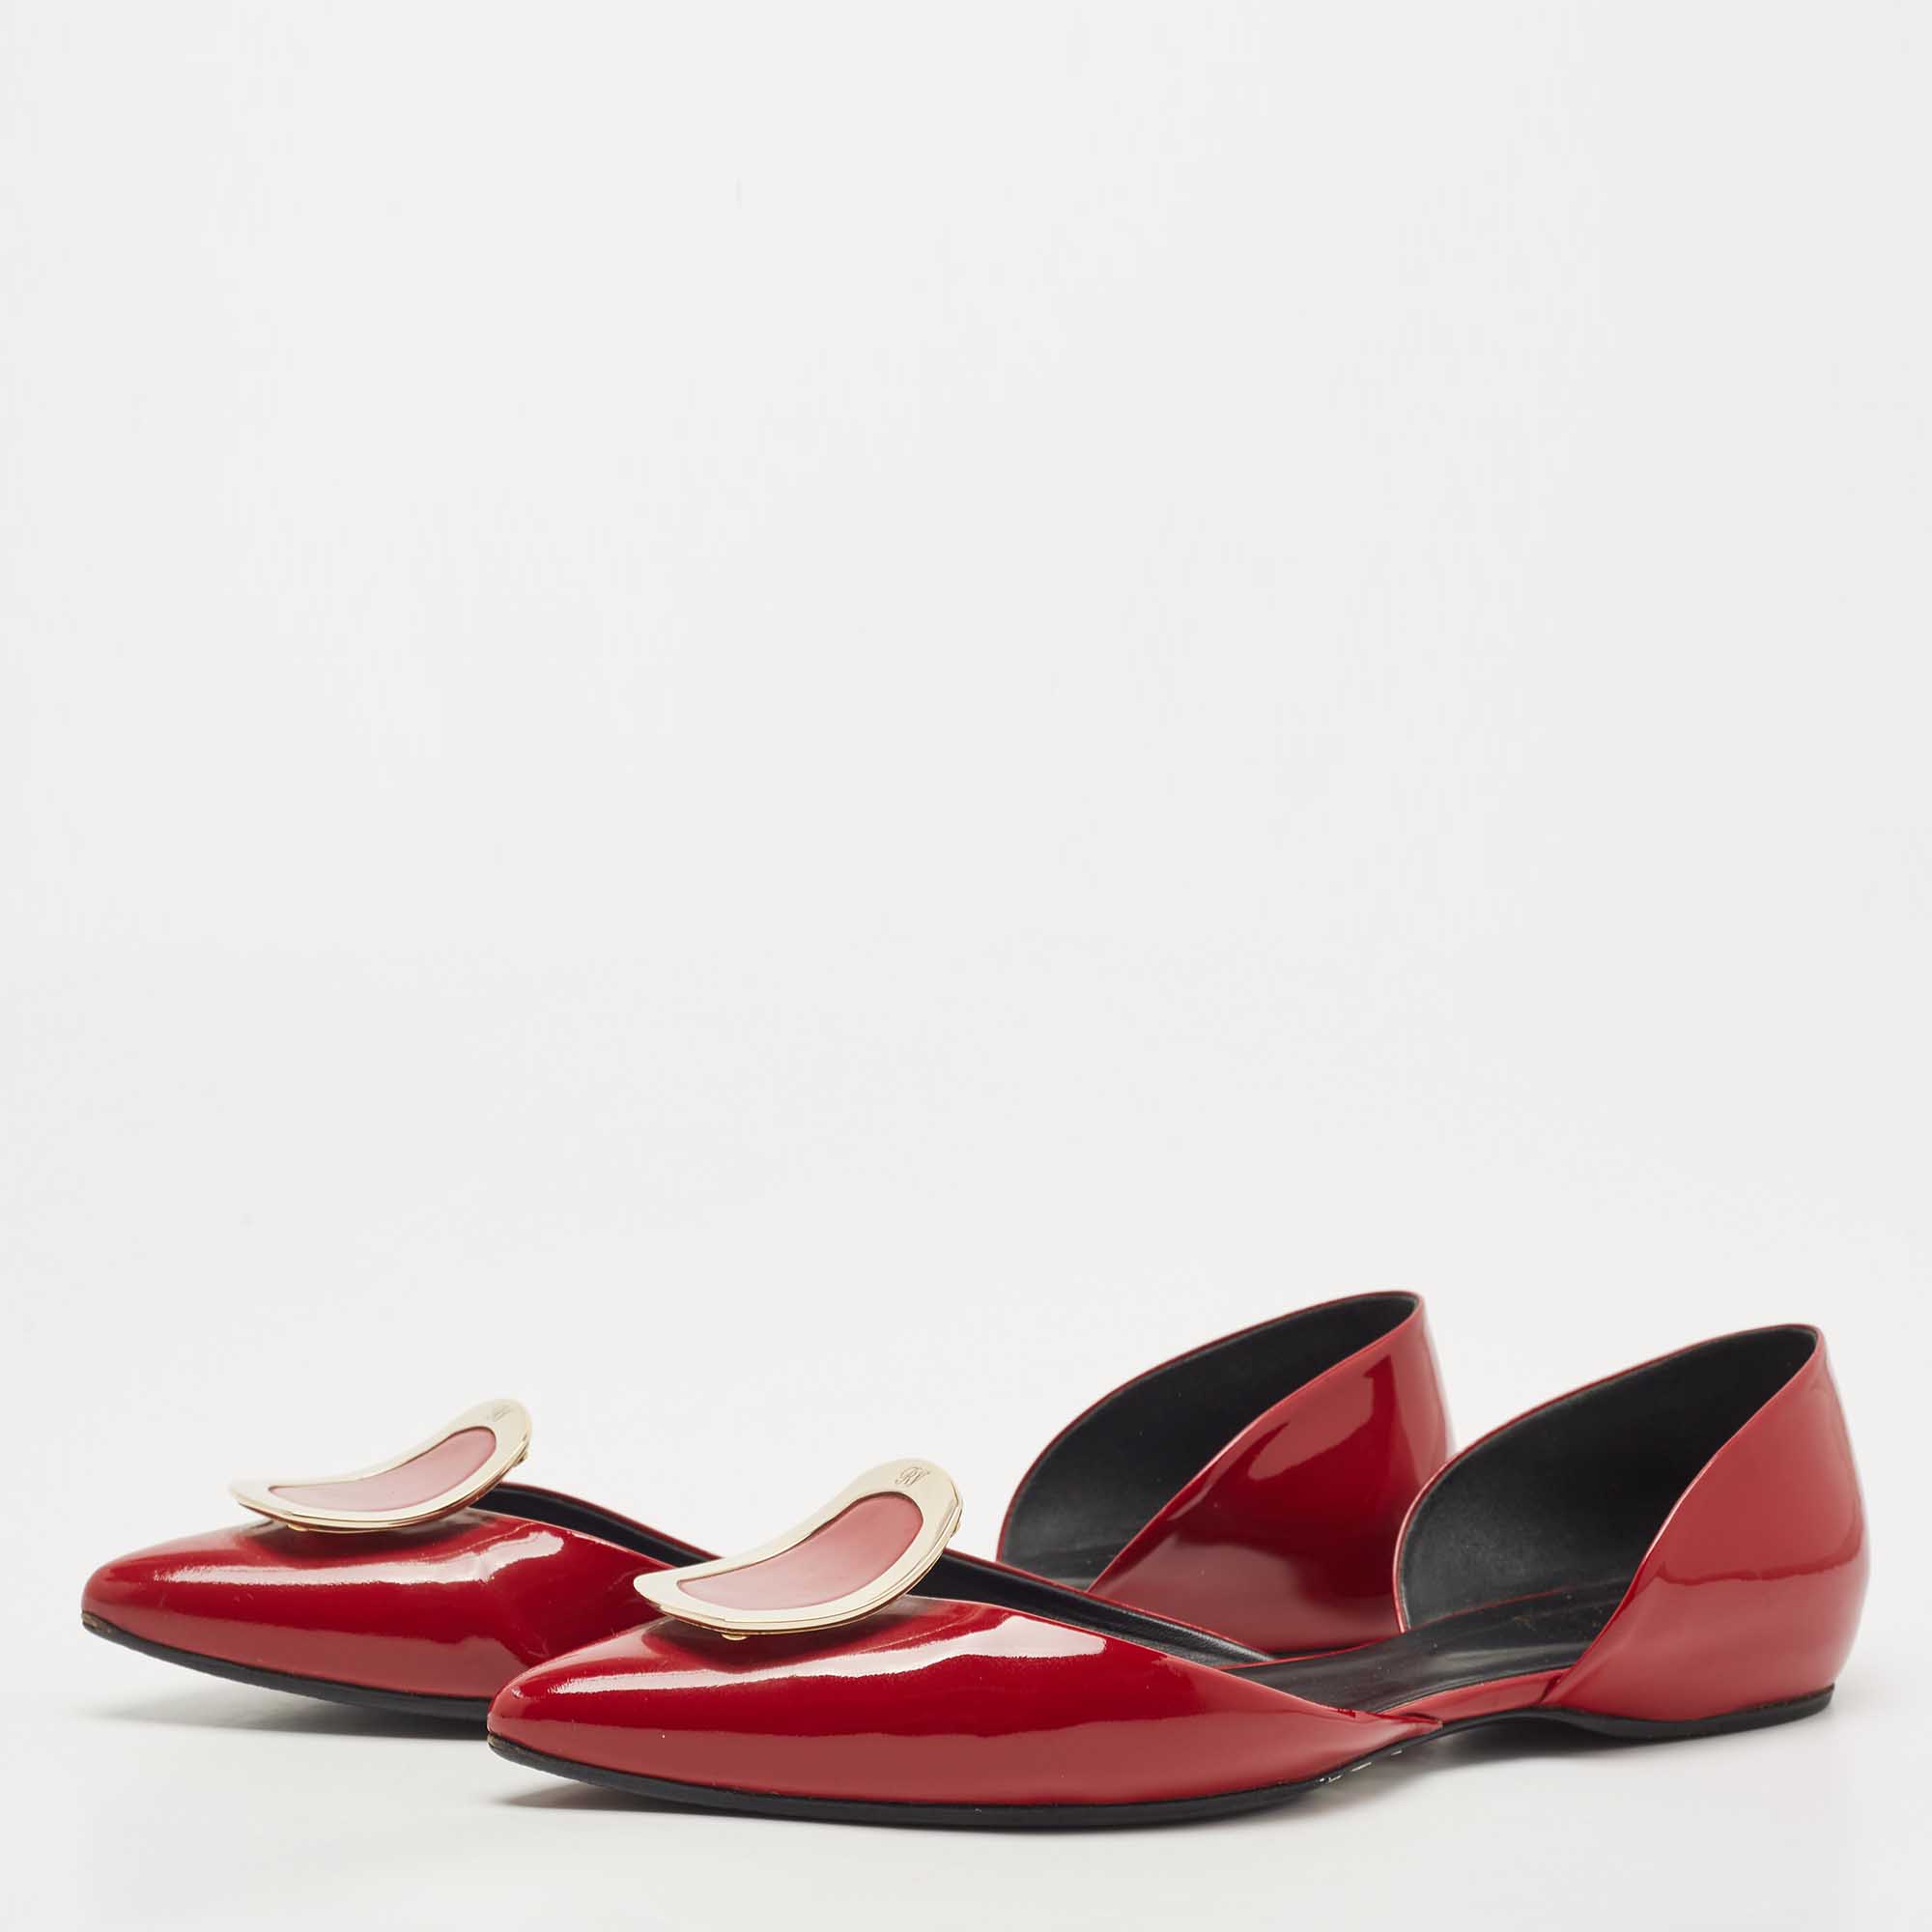 

Roger Vivier Burgundy Patent Leather Chip D'orsay Flats Size